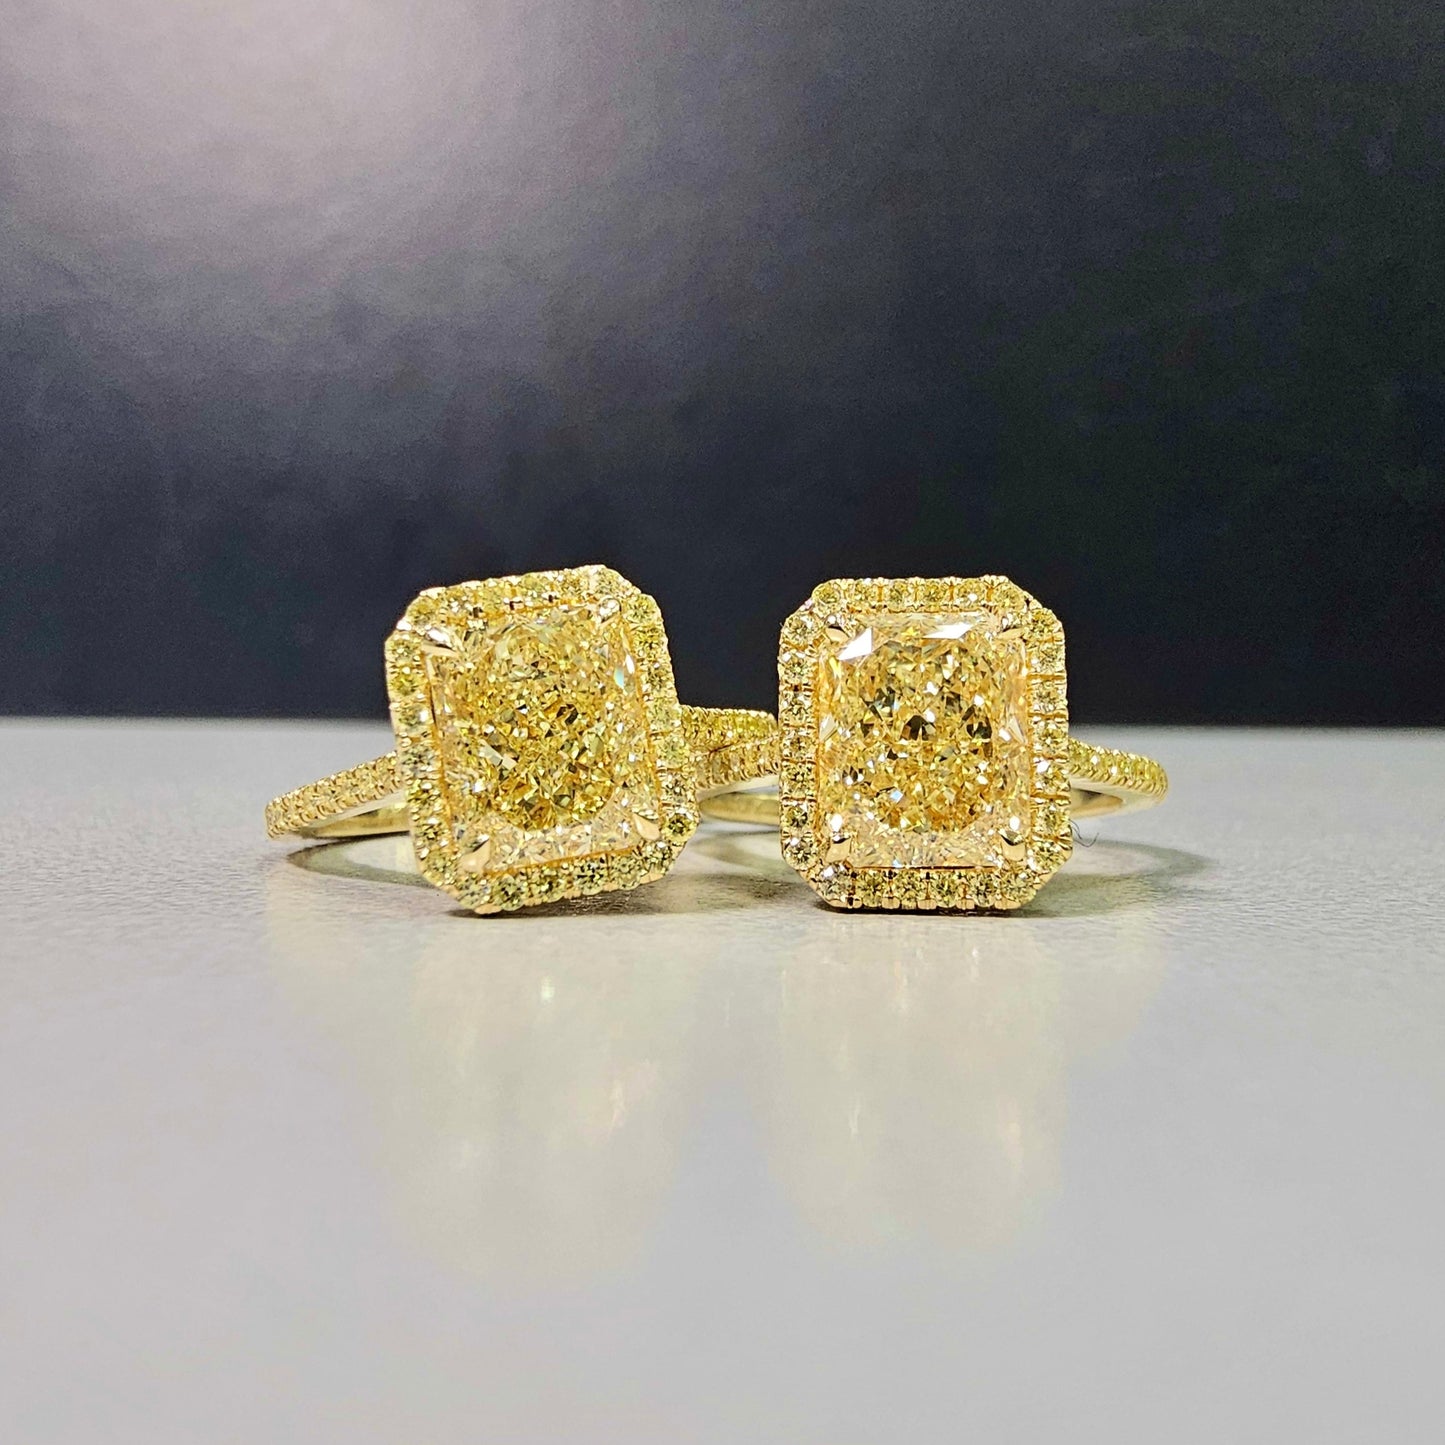 2.28 Carat Center Diamond GIA Light Yellow Diamond (Y-Z) Radiant Cut Diamond  0.30 Carats of Fancy Yellow Rounds  VS1 Clarity  Medium Blue Fluorescence Excellent, Very Good cutting Set in 18k Yellow Gold  GIA Certified Diamond Handmade in NYC 